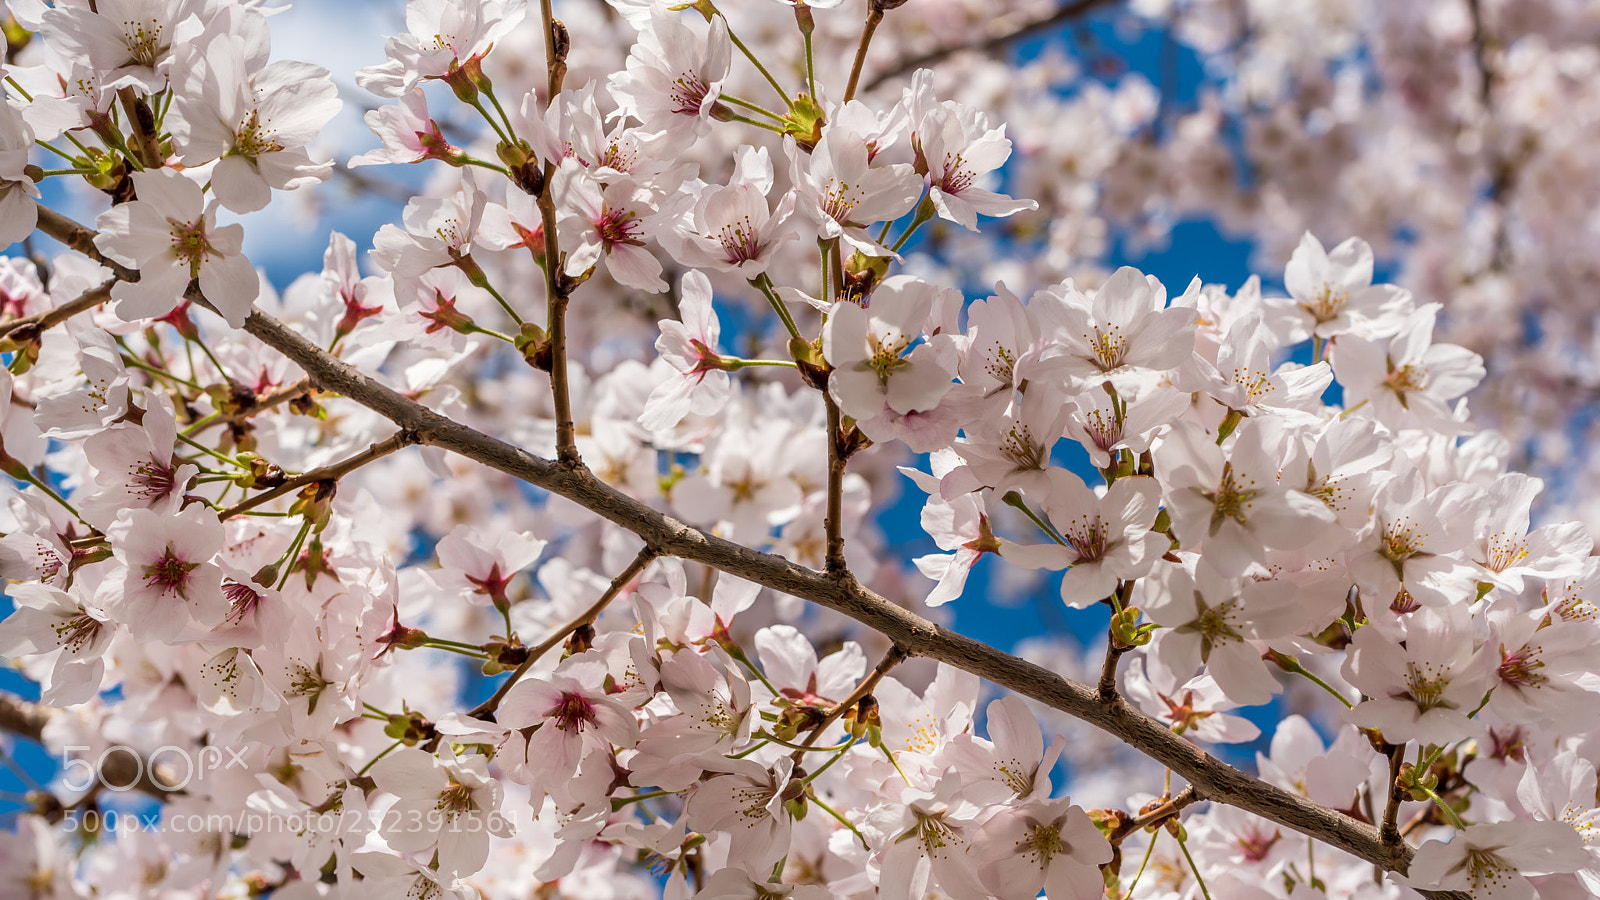 Nikon D750 sample photo. Cherry blossoms at their photography